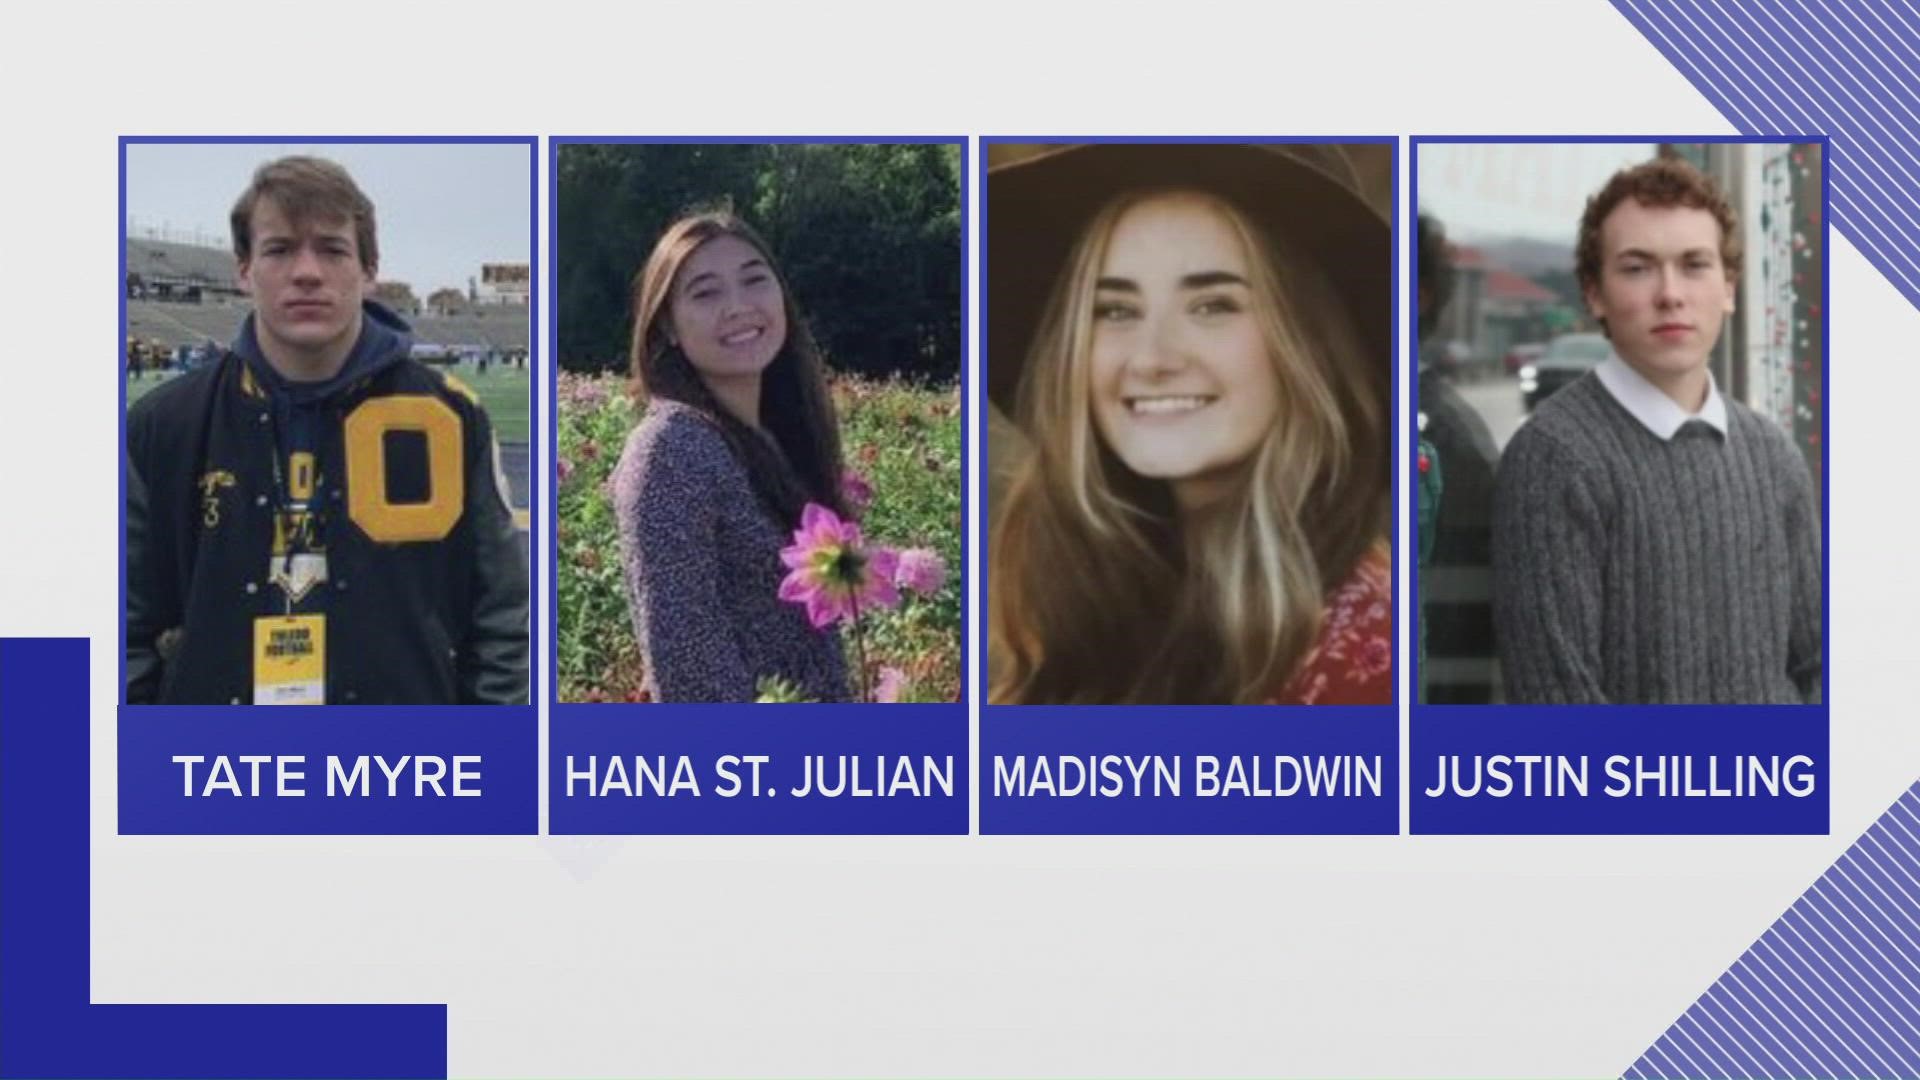 Of the seven shooting survivors, just one, a 17 year old girl, remains in the hospital in stable condition.